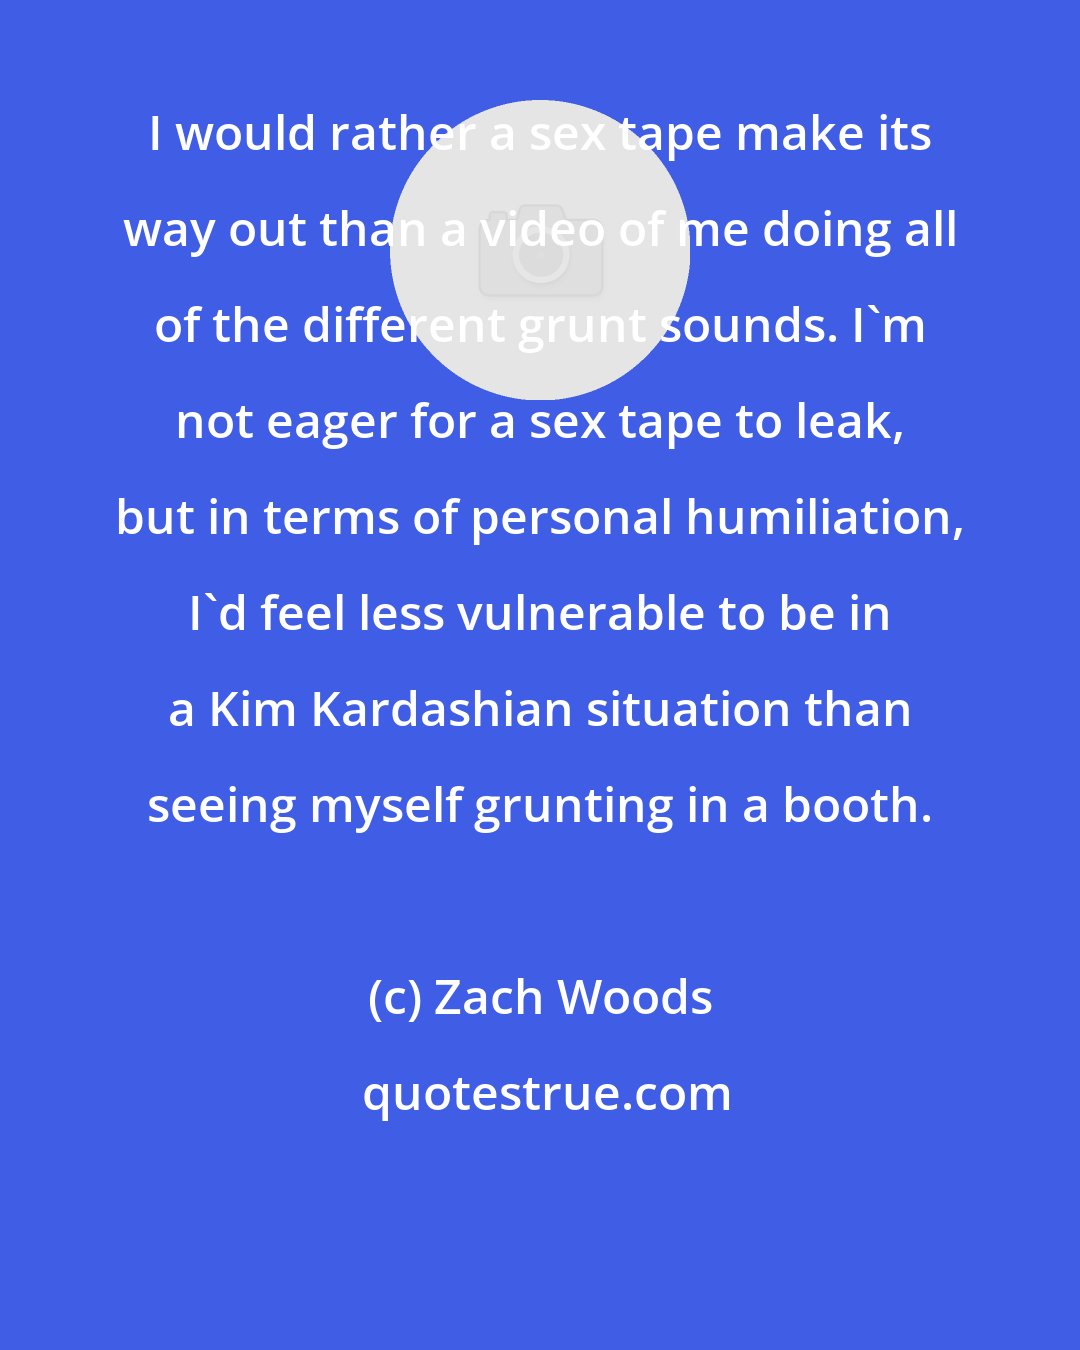 Zach Woods: I would rather a sex tape make its way out than a video of me doing all of the different grunt sounds. I'm not eager for a sex tape to leak, but in terms of personal humiliation, I'd feel less vulnerable to be in a Kim Kardashian situation than seeing myself grunting in a booth.